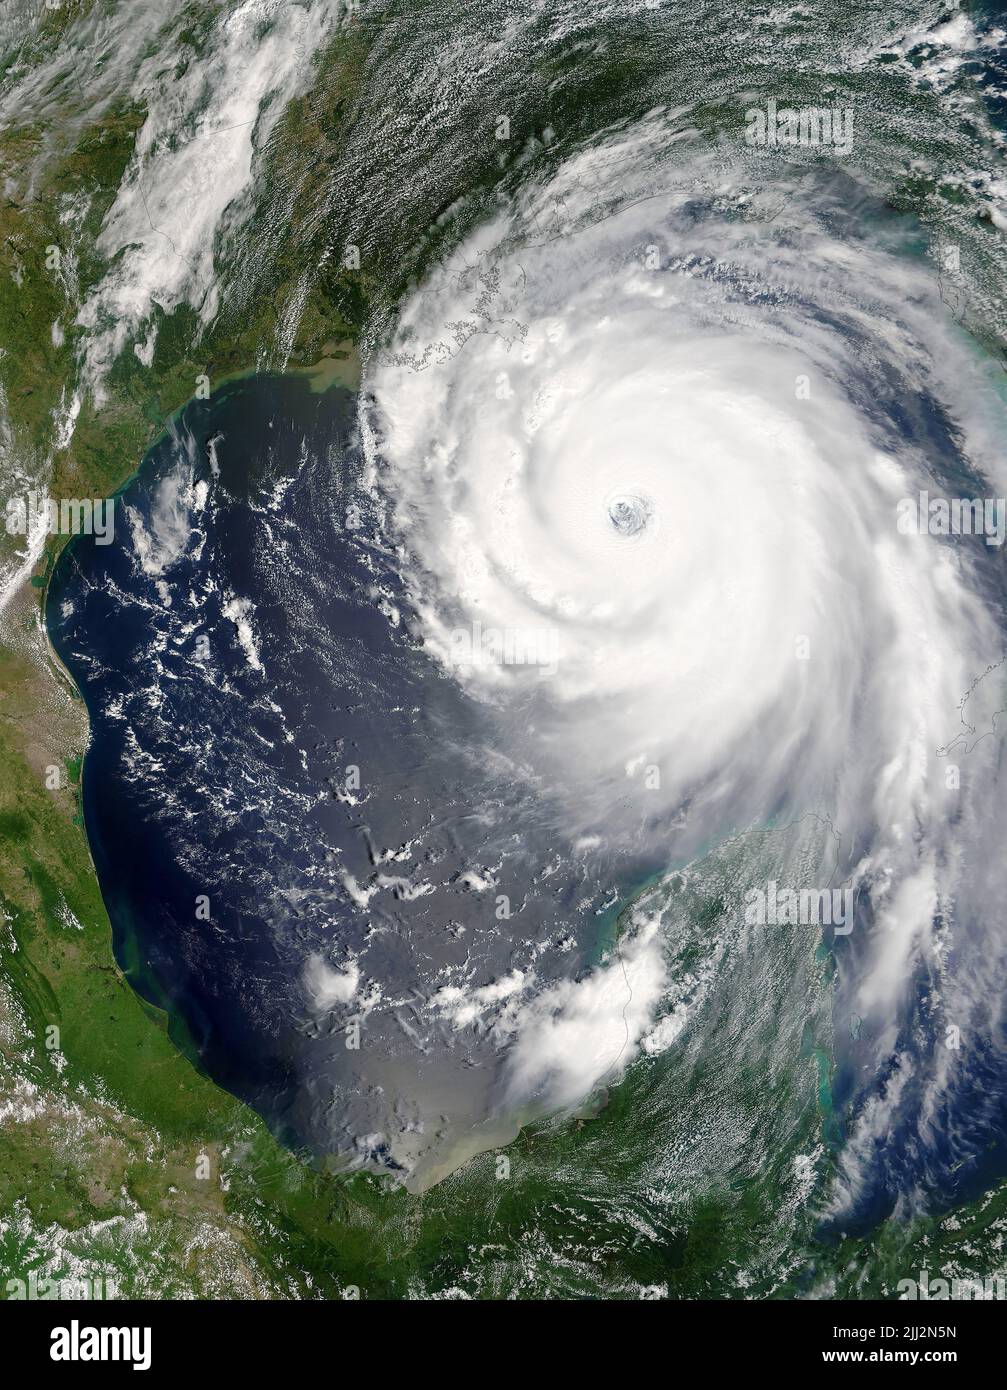 Satellite view of Hurricane Katrina, a Category 5 hurricane that wreaked havoc on the U.S. Gulf Coast in the New Orleans area on August 29, 2005. (USA) Stock Photo